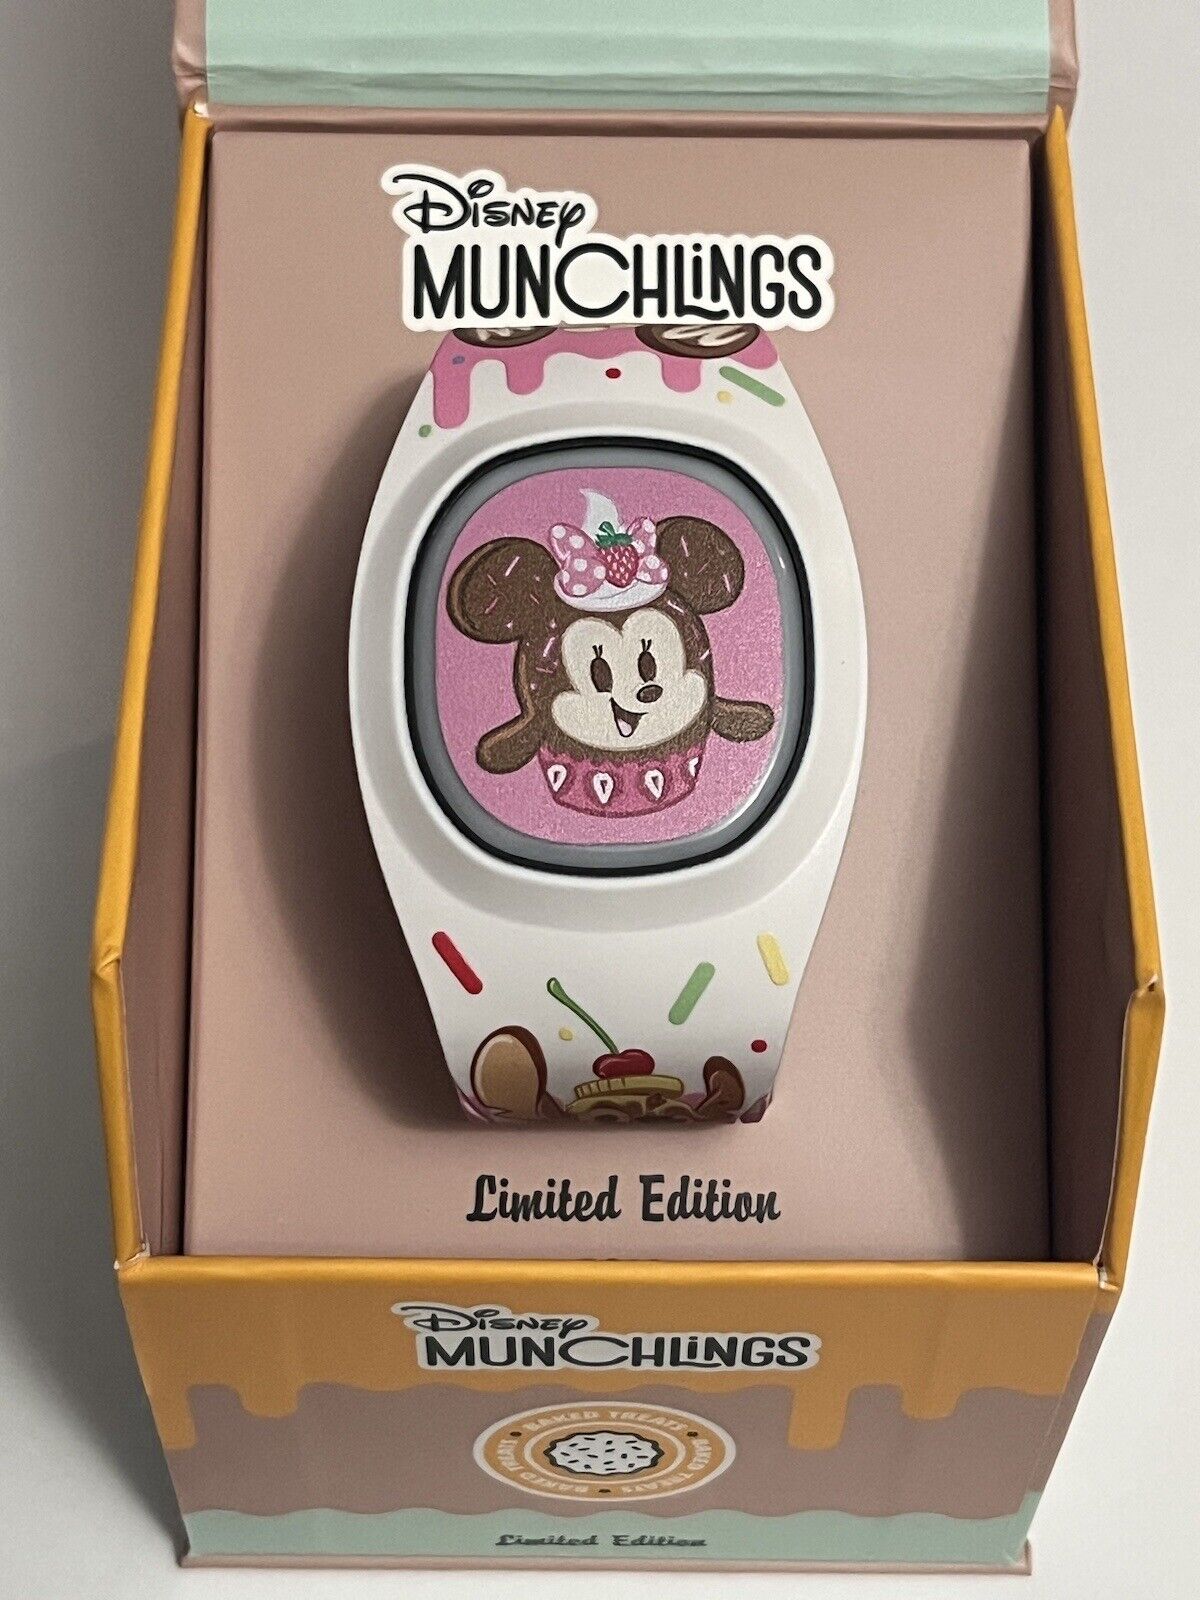 Disney Magic Band + Plus Munchlings Minnie Mouse Cupcake LE 5400 NEW UNLINKED